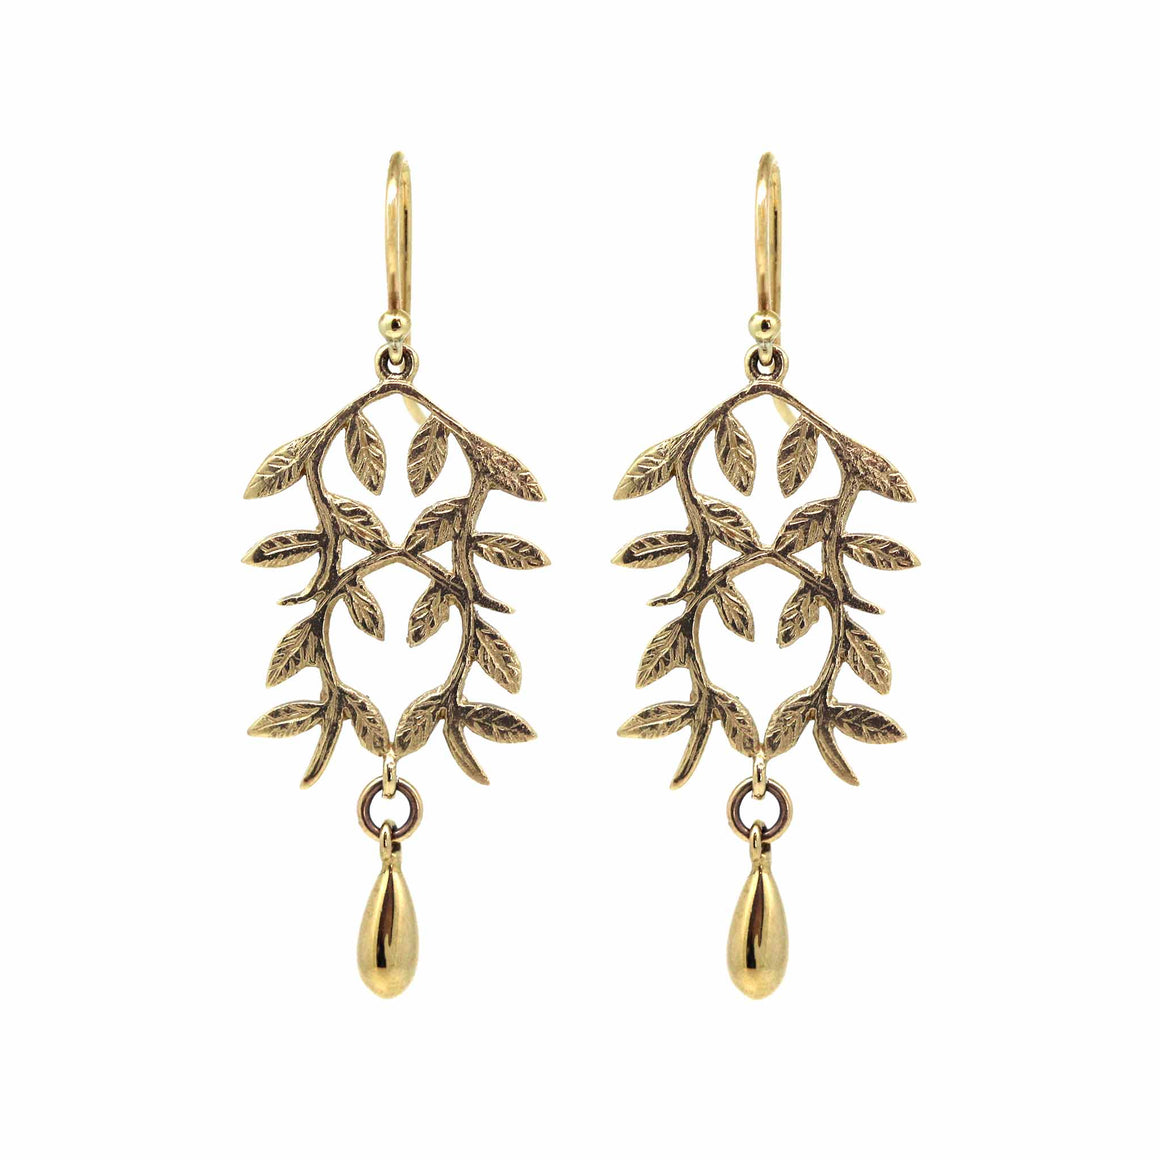 Tuileries gold statement earring